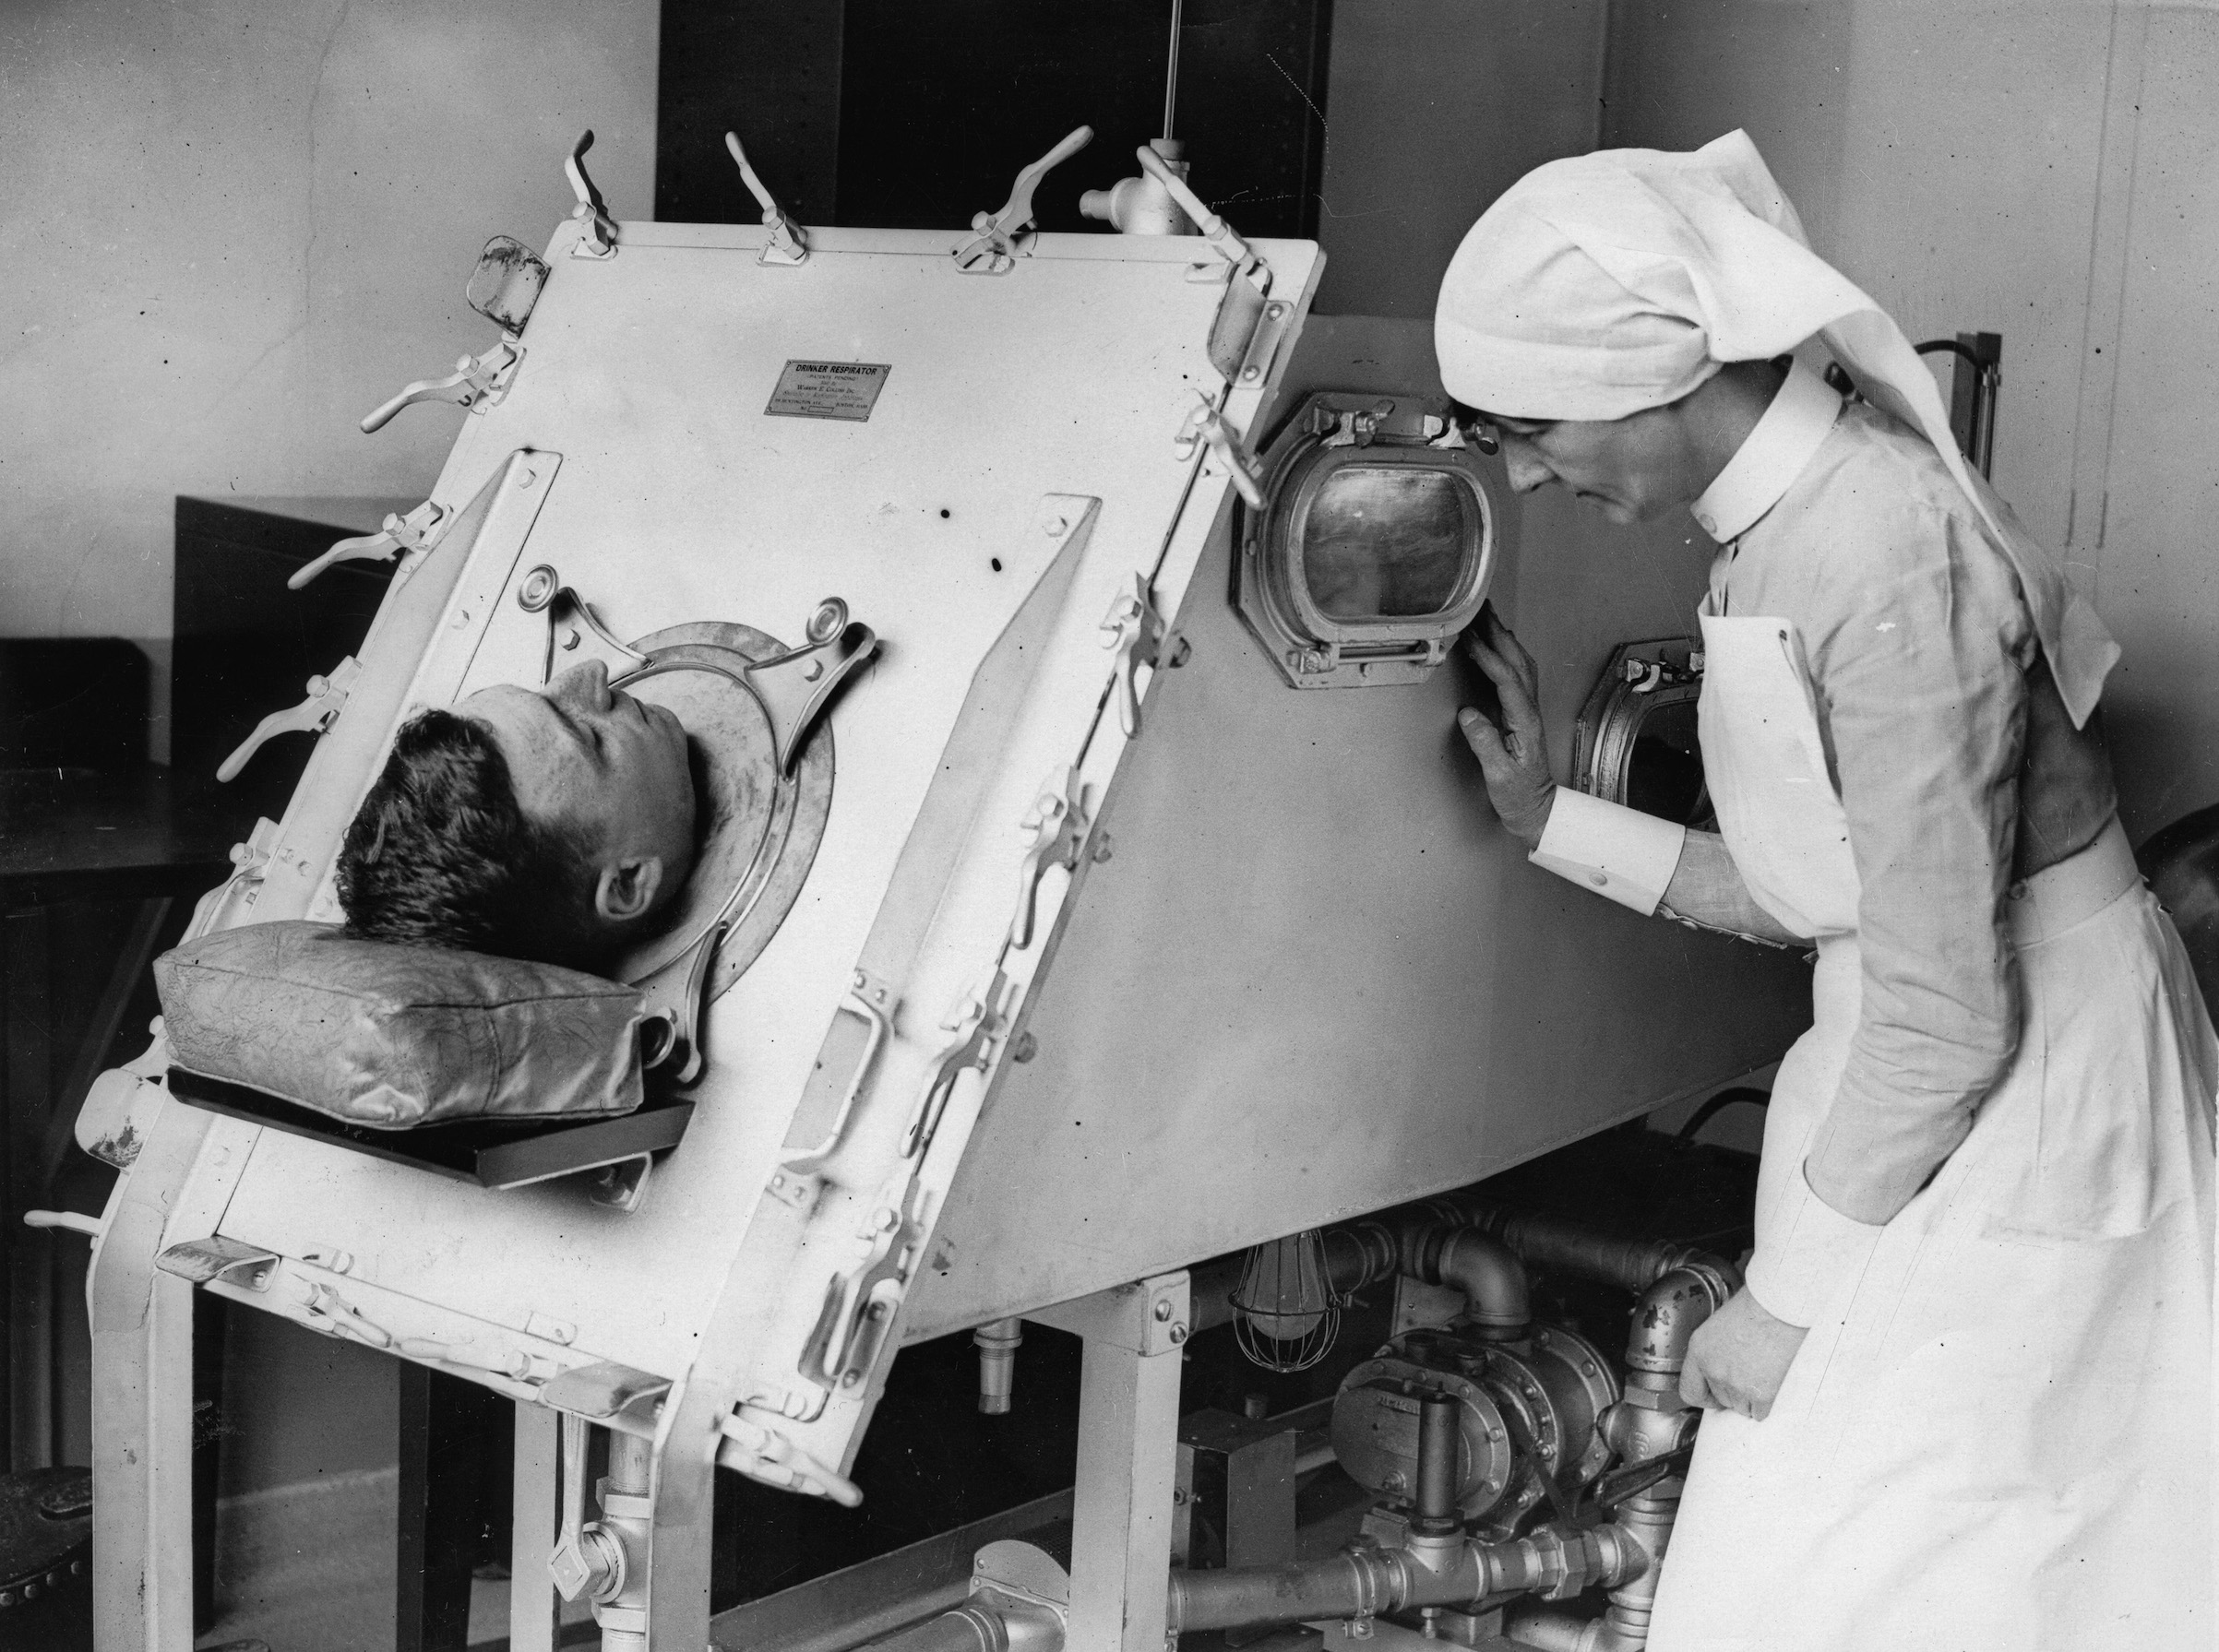 An iron lung at St. Bartholomews Hospital. London. About 1935. (Getty Images)